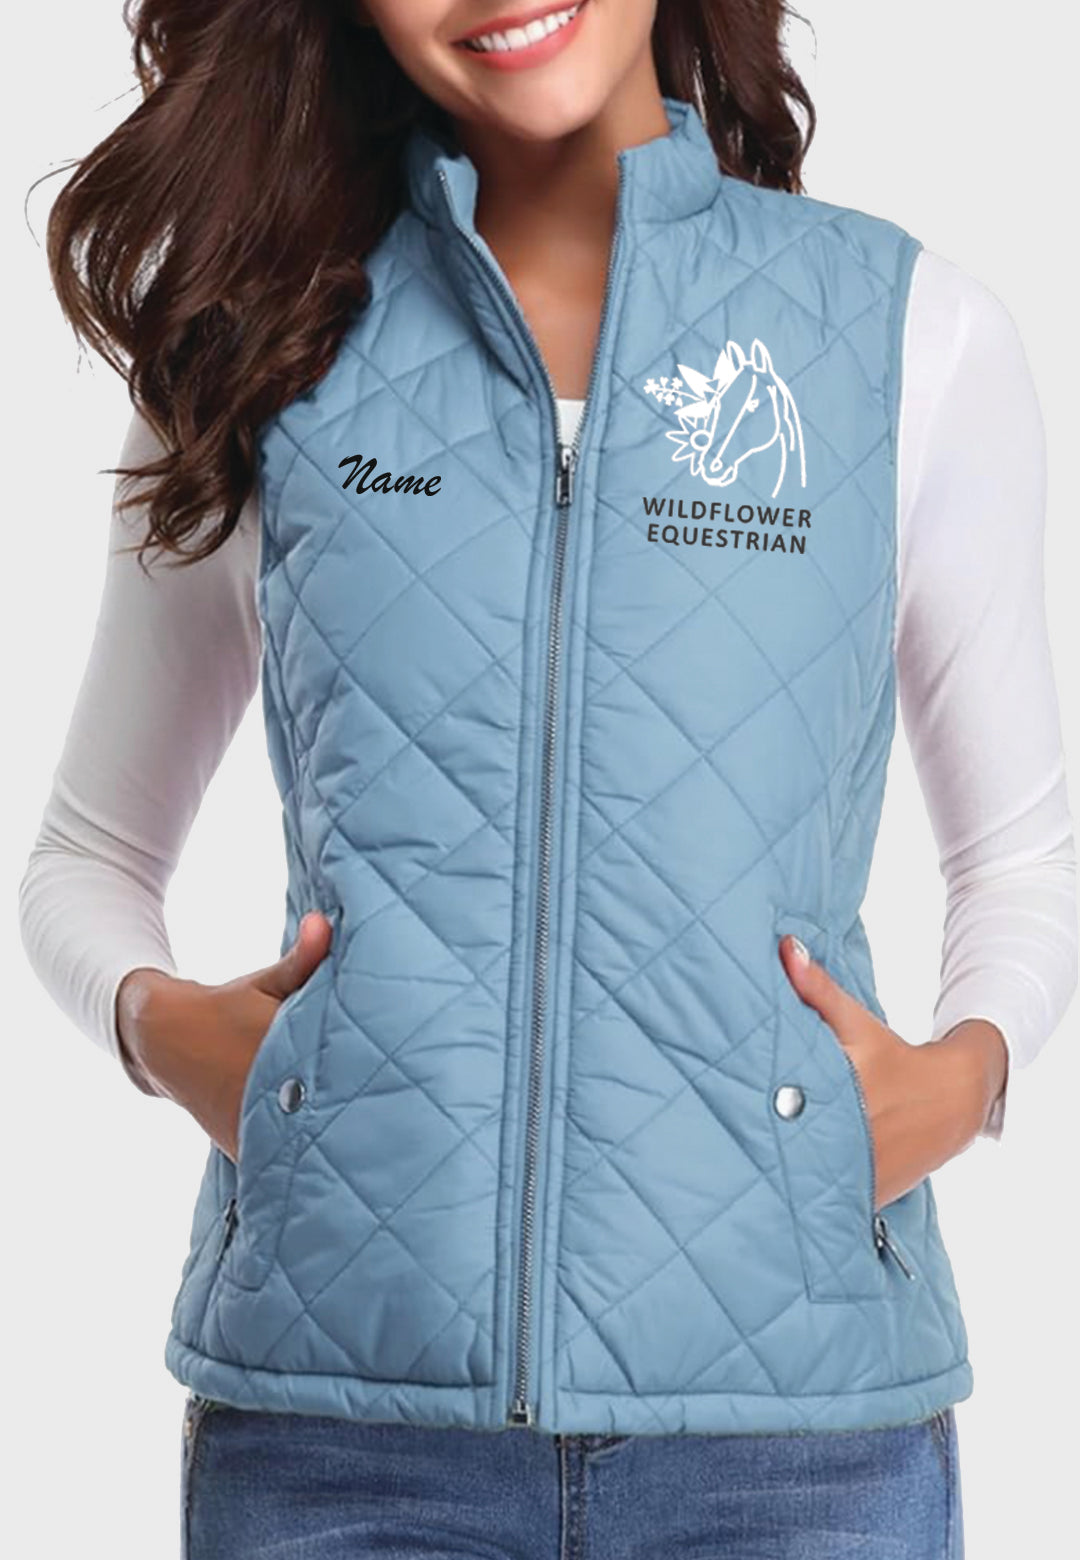 Wildflower Equestrian Fuinloth Women's Quilted Vest, 2 Color Options